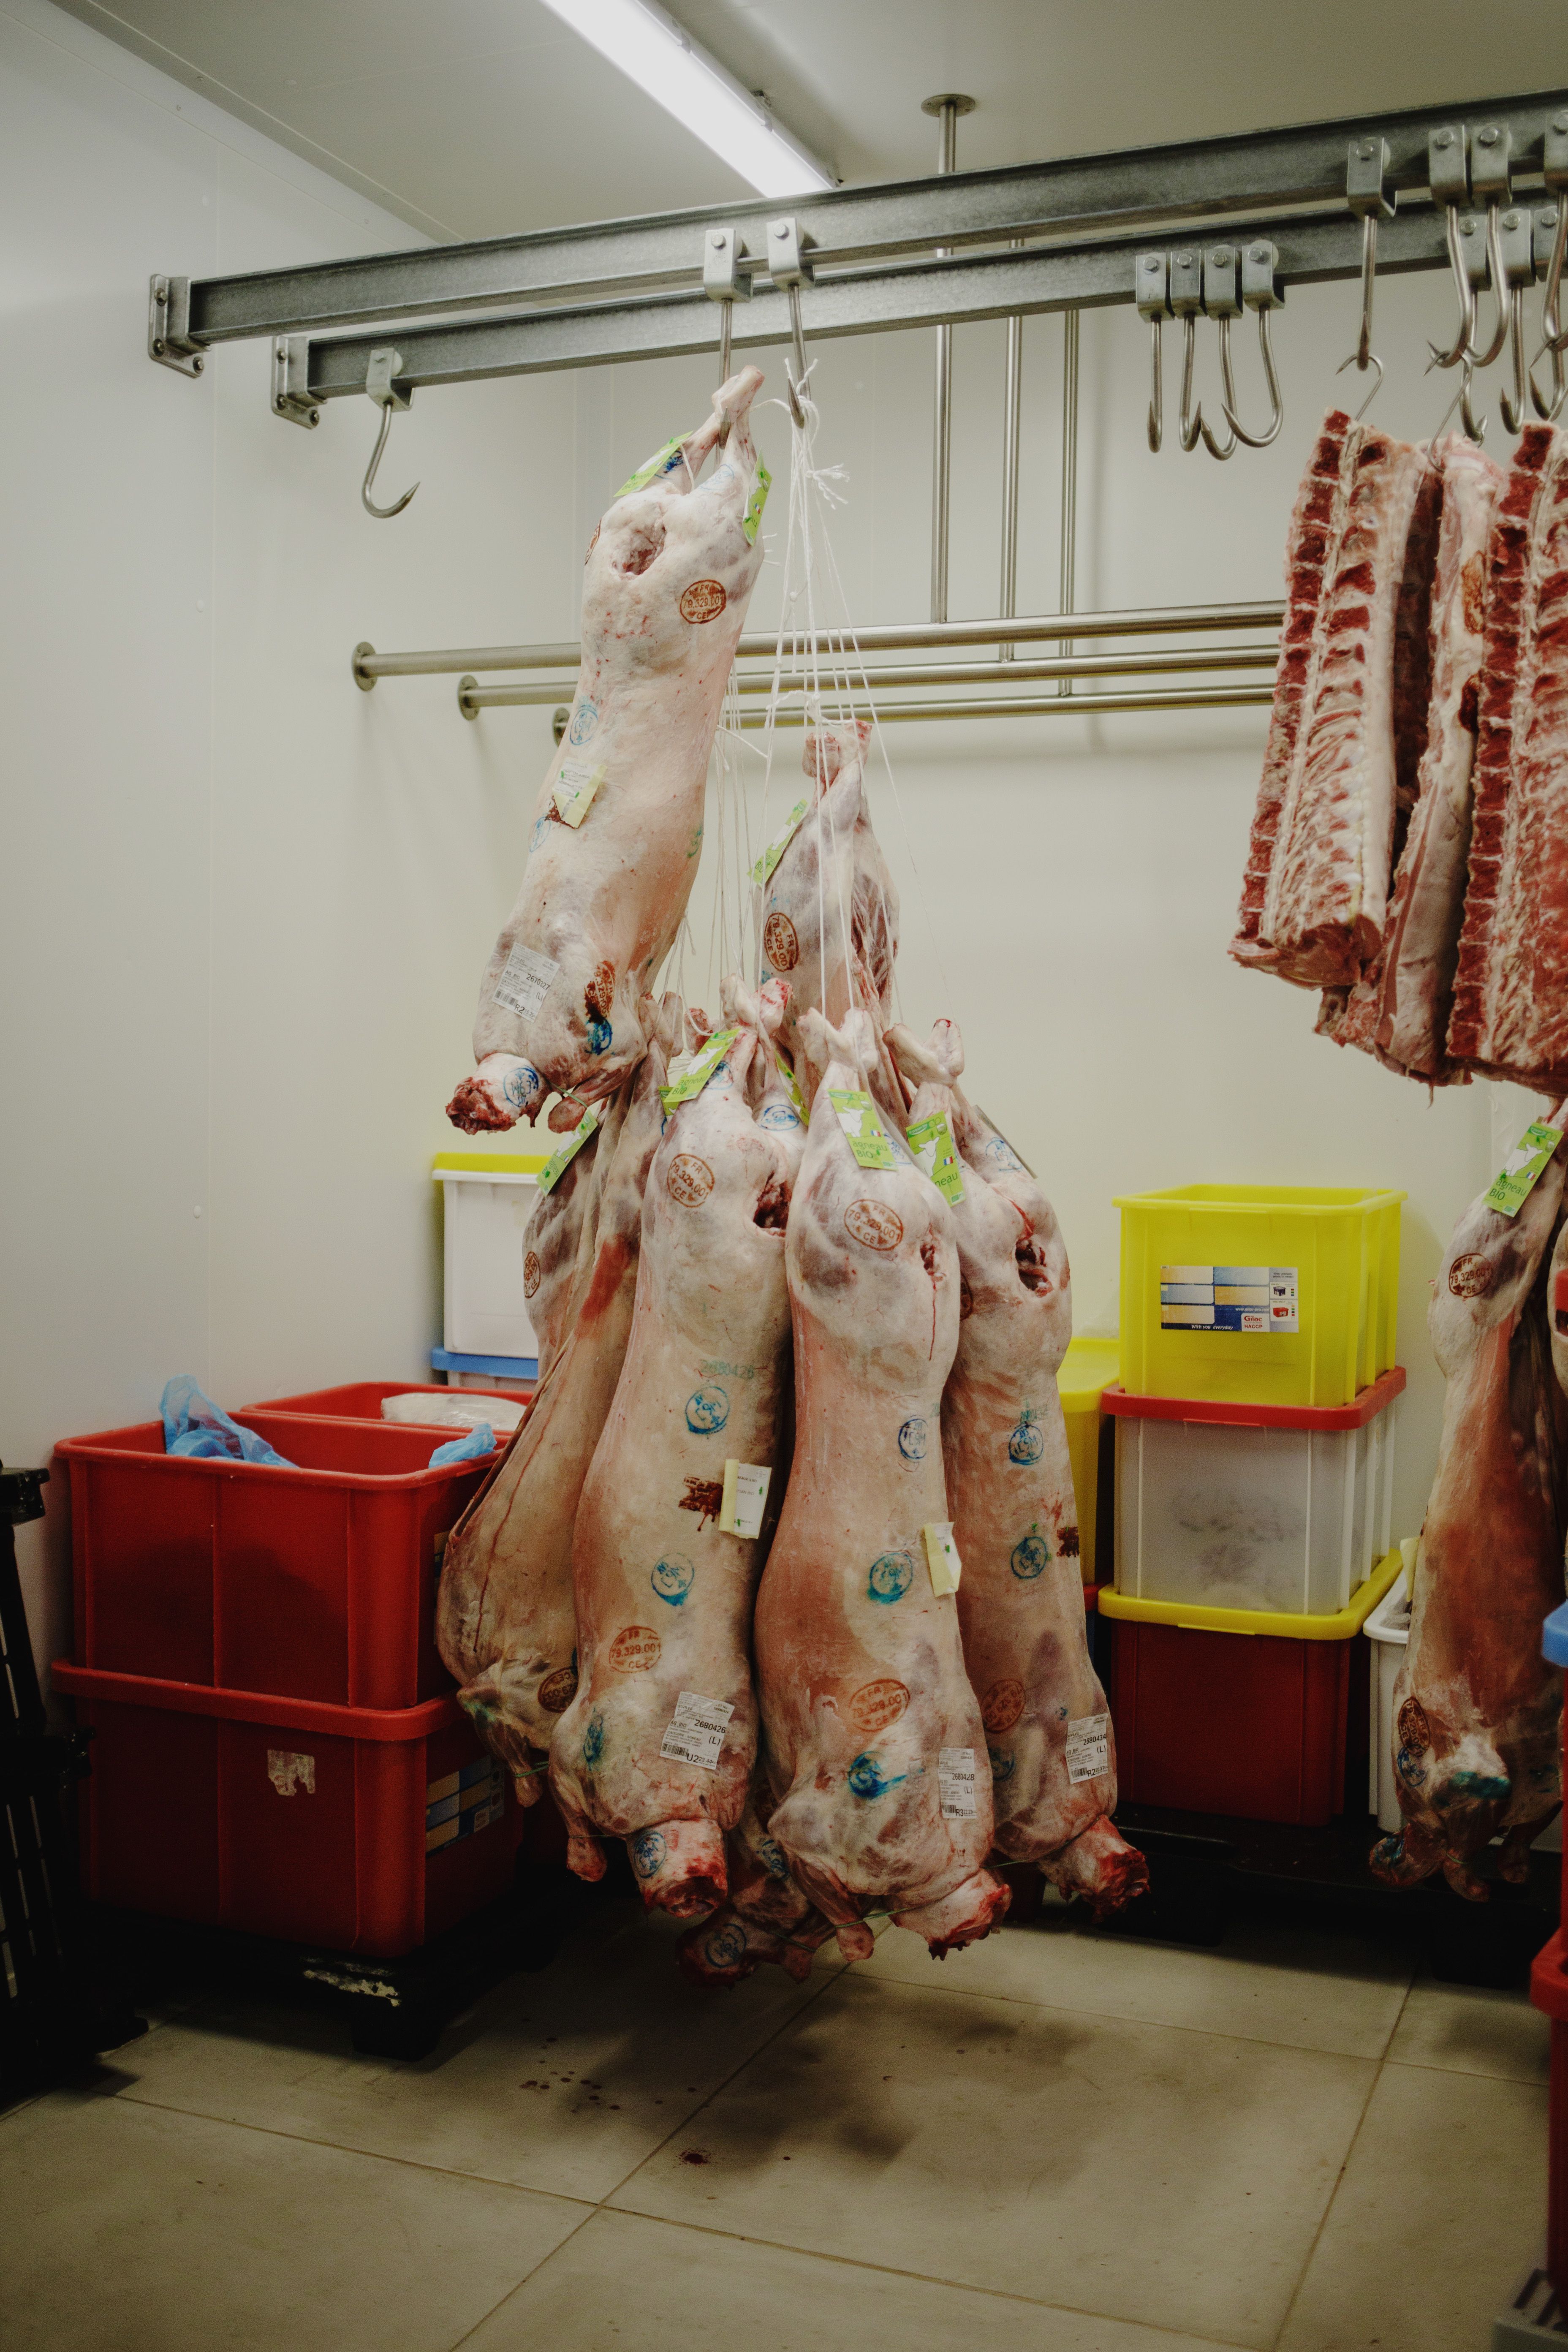 Why halal meat generates so much controversy in Europe - The Washington Post